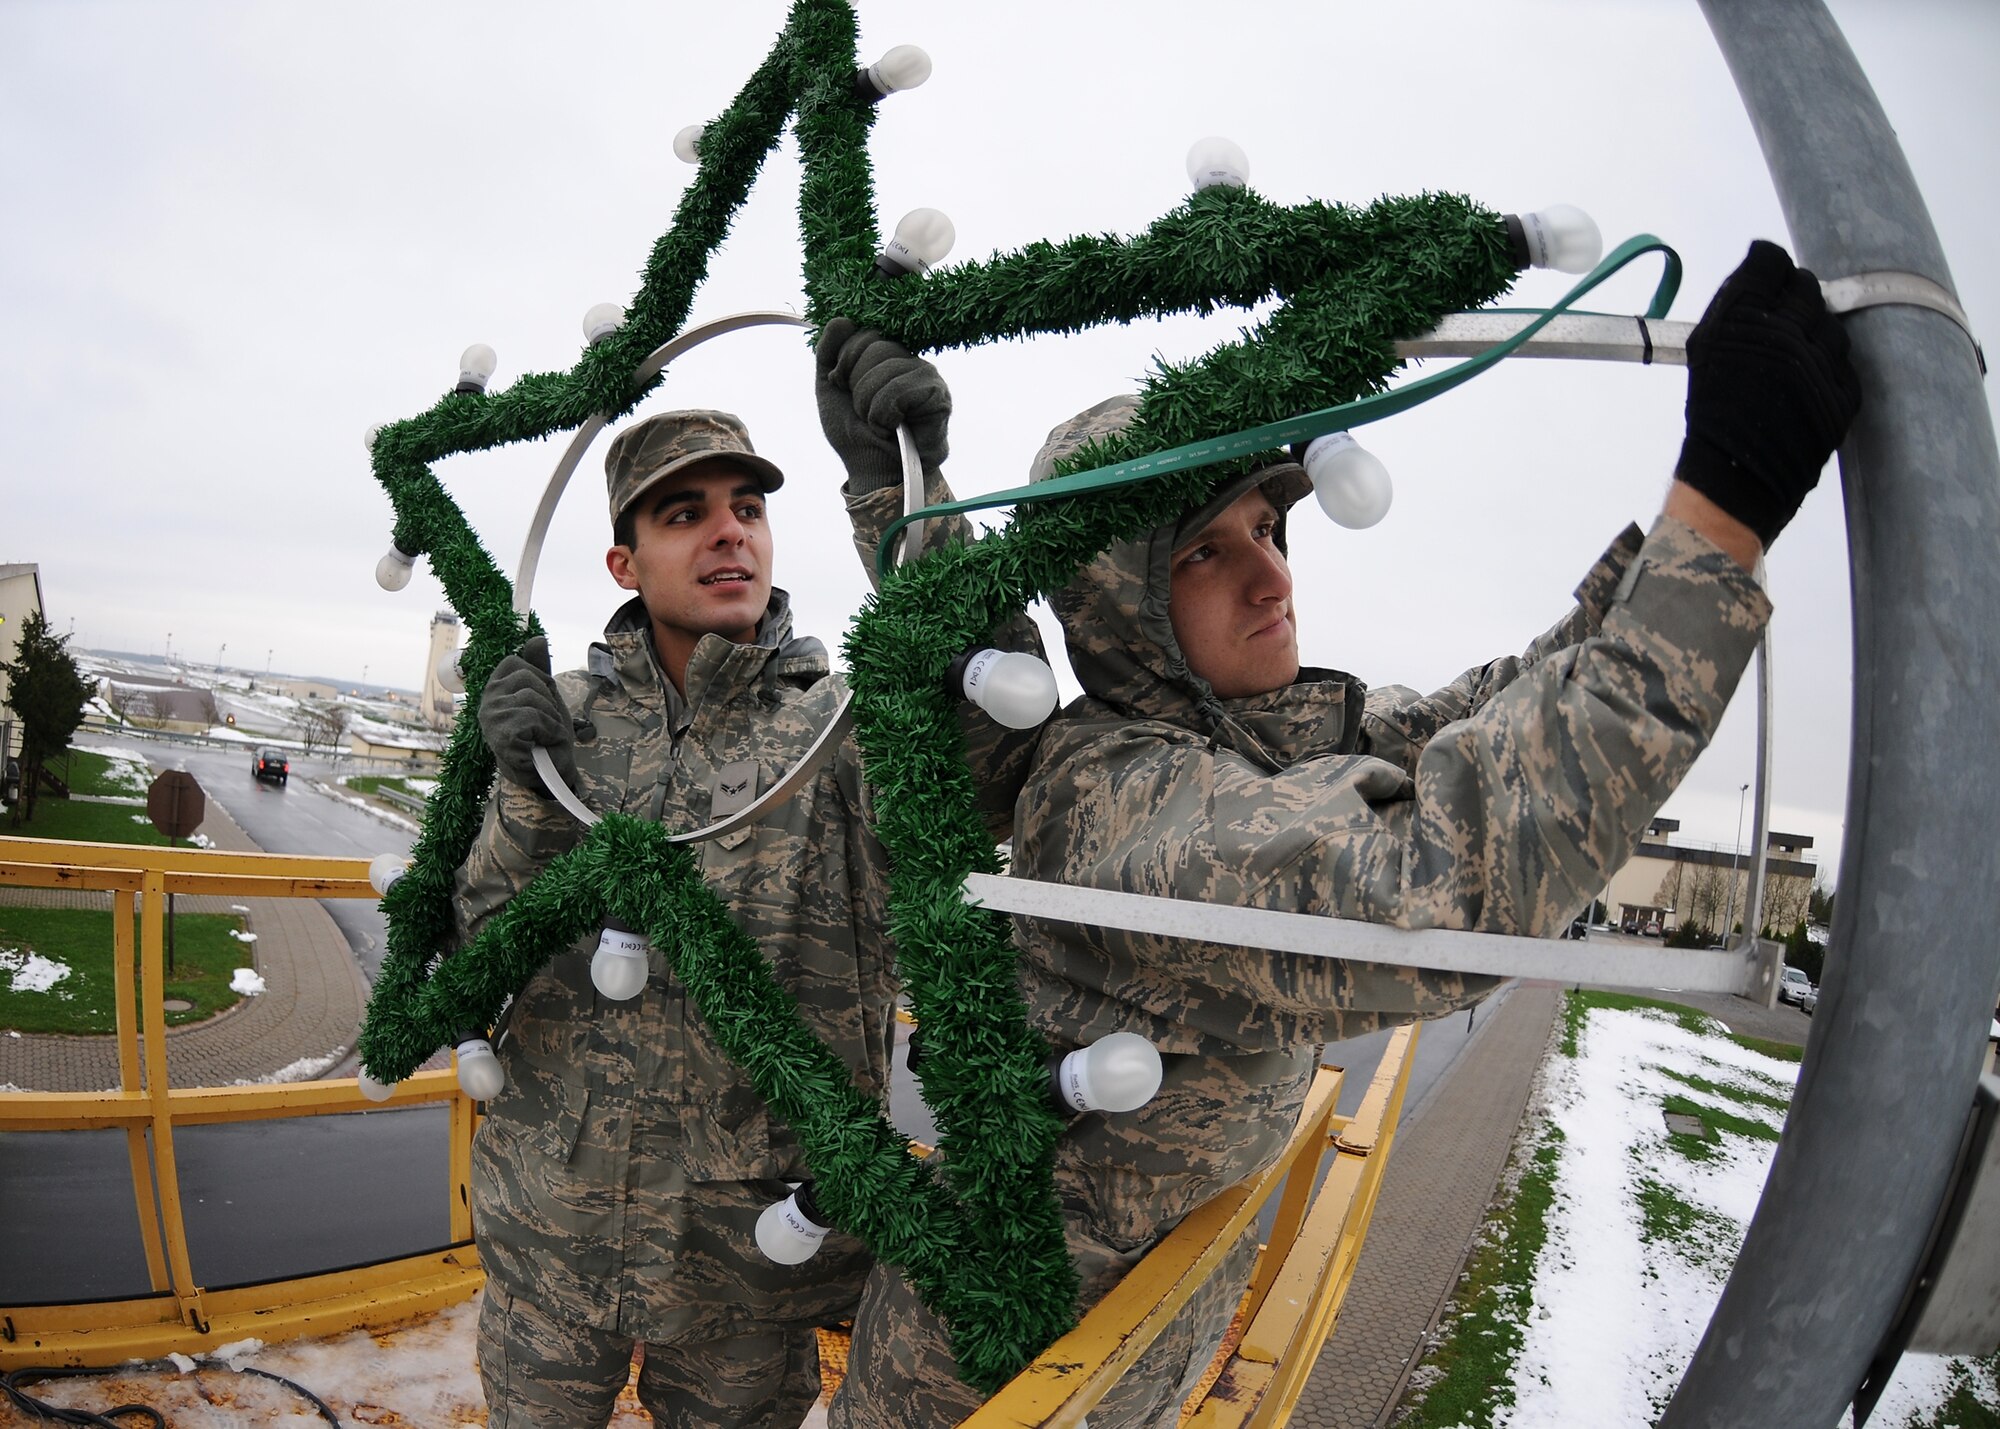 SPANGDAHLEM AIR BASE, Germany -- Airmen 1st Class Mahyar Rostami and Christopher Tripp, 52nd Civil Engineer Squadron, install Christmas decorations along the main road on base Nov. 24, 2008. (U.S. Air Force photo by Airman 1st Class Nathanael Callon)